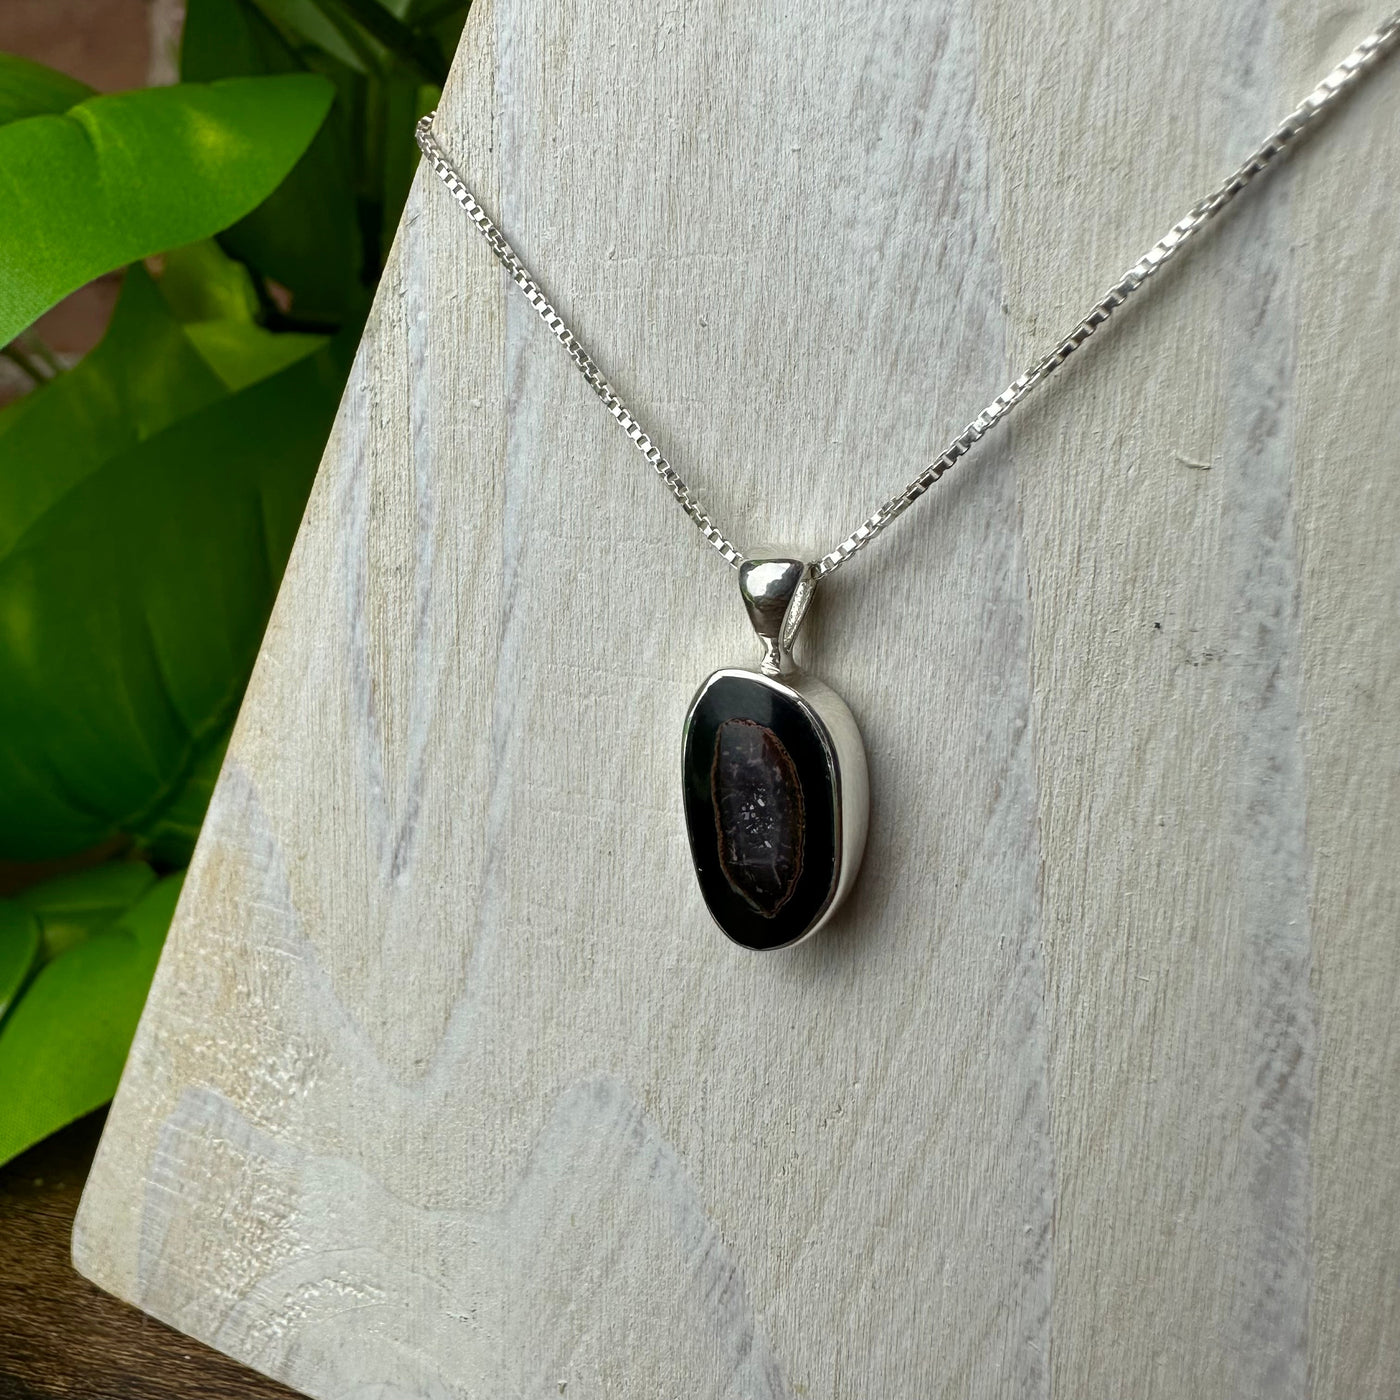 Geode Mini Bezel Pendant Necklace with 16-18" Adjustable Sterling Silver Chain